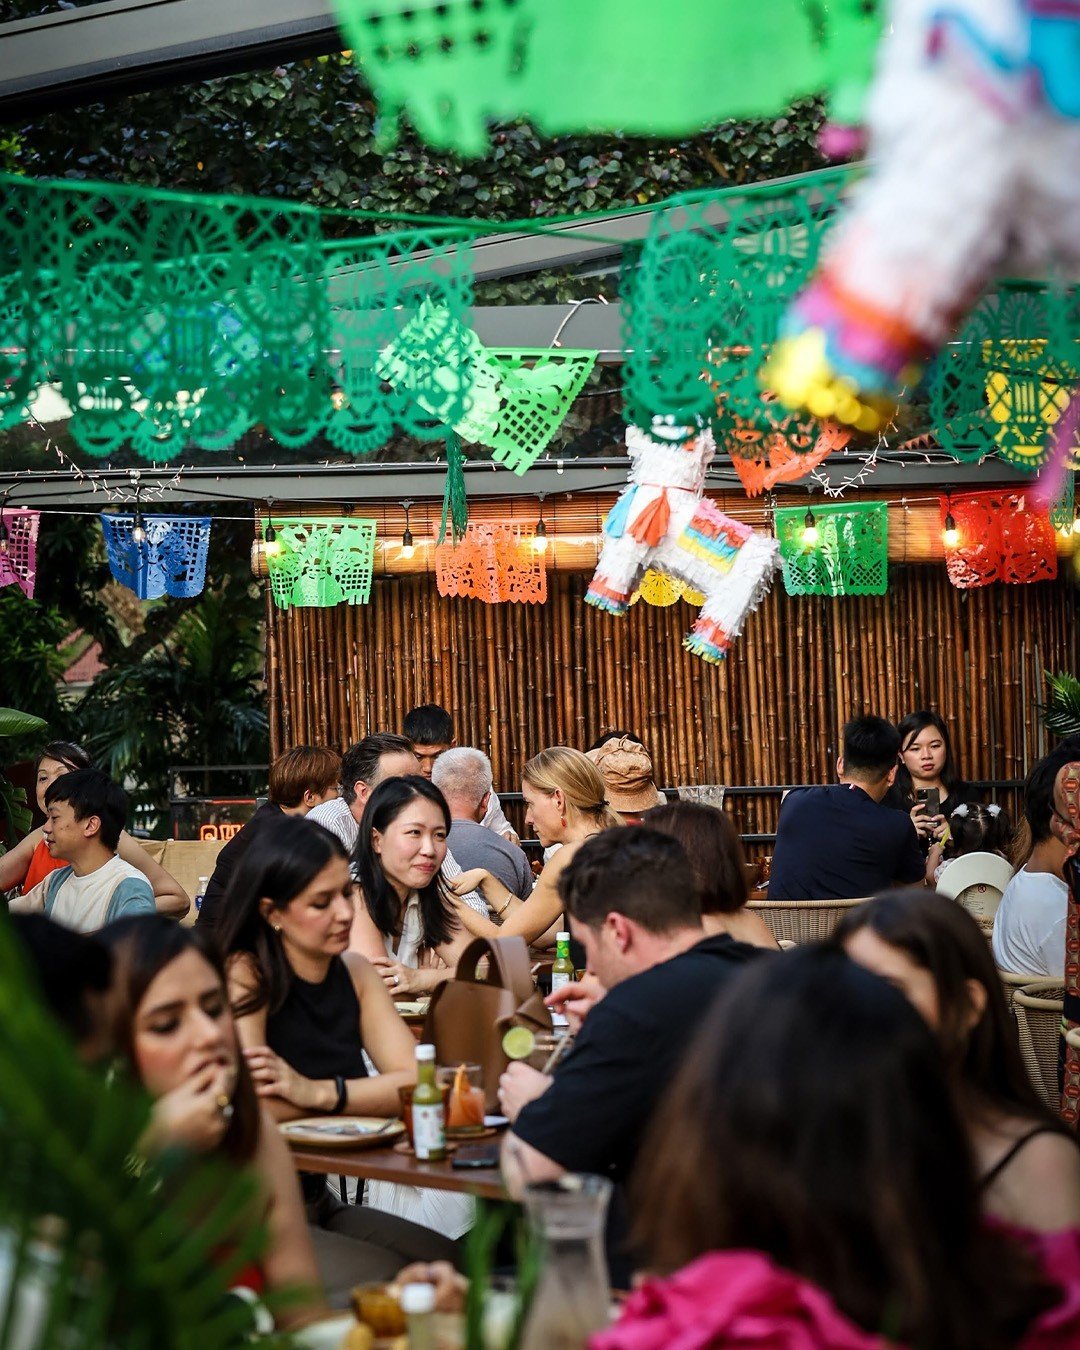 &iexcl;Hola, amigos! What a fiesta it was; gracias to everyone who joined us for our Tropical Garden Fiesta on Cinco de Mayo! ⁠
⁠
From the gigante cocktail towers to the mezcal flights that flowed like agua, it was an evening to remember. DJ Black Tr